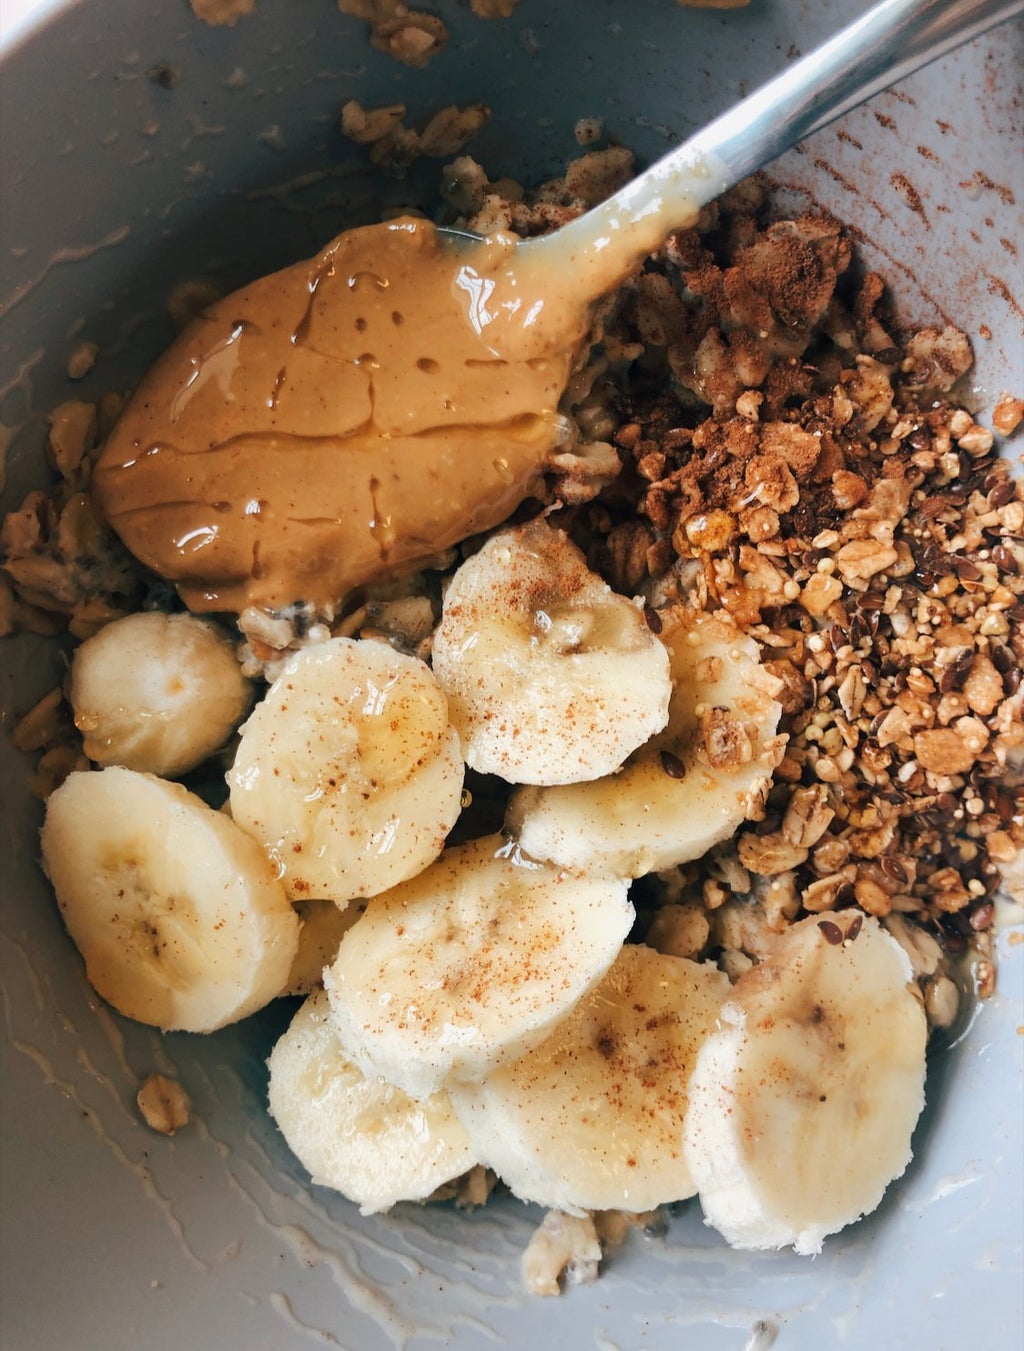 dorm oatmeal with bananas and nut butter. There is a spoon in it